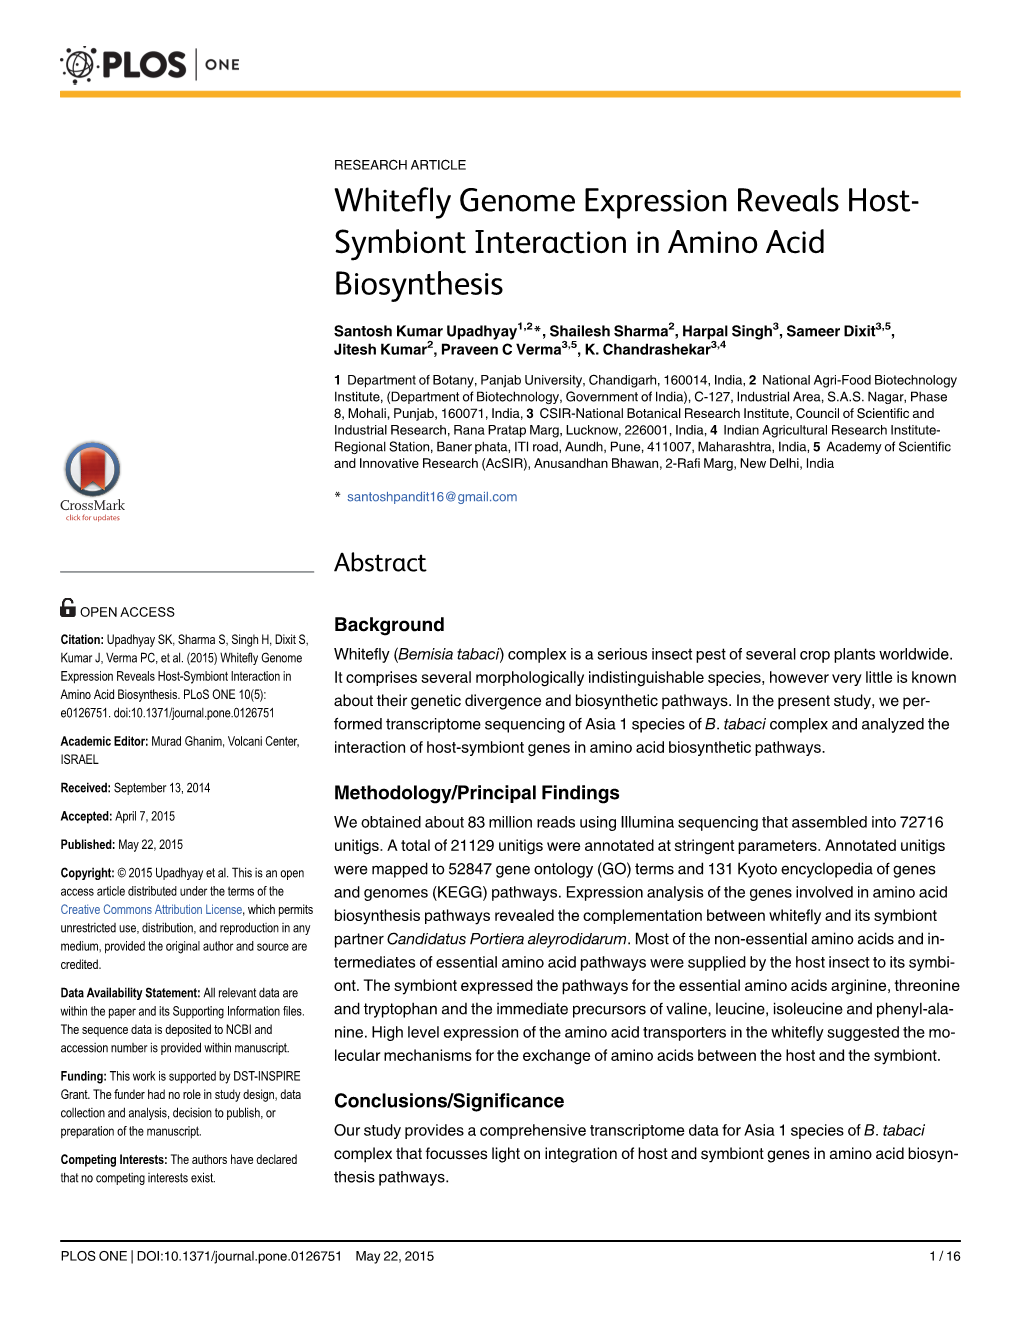 Whitefly Genome Expression Reveals Host-Symbiont Interaction in Amino Acid Biosynthesis